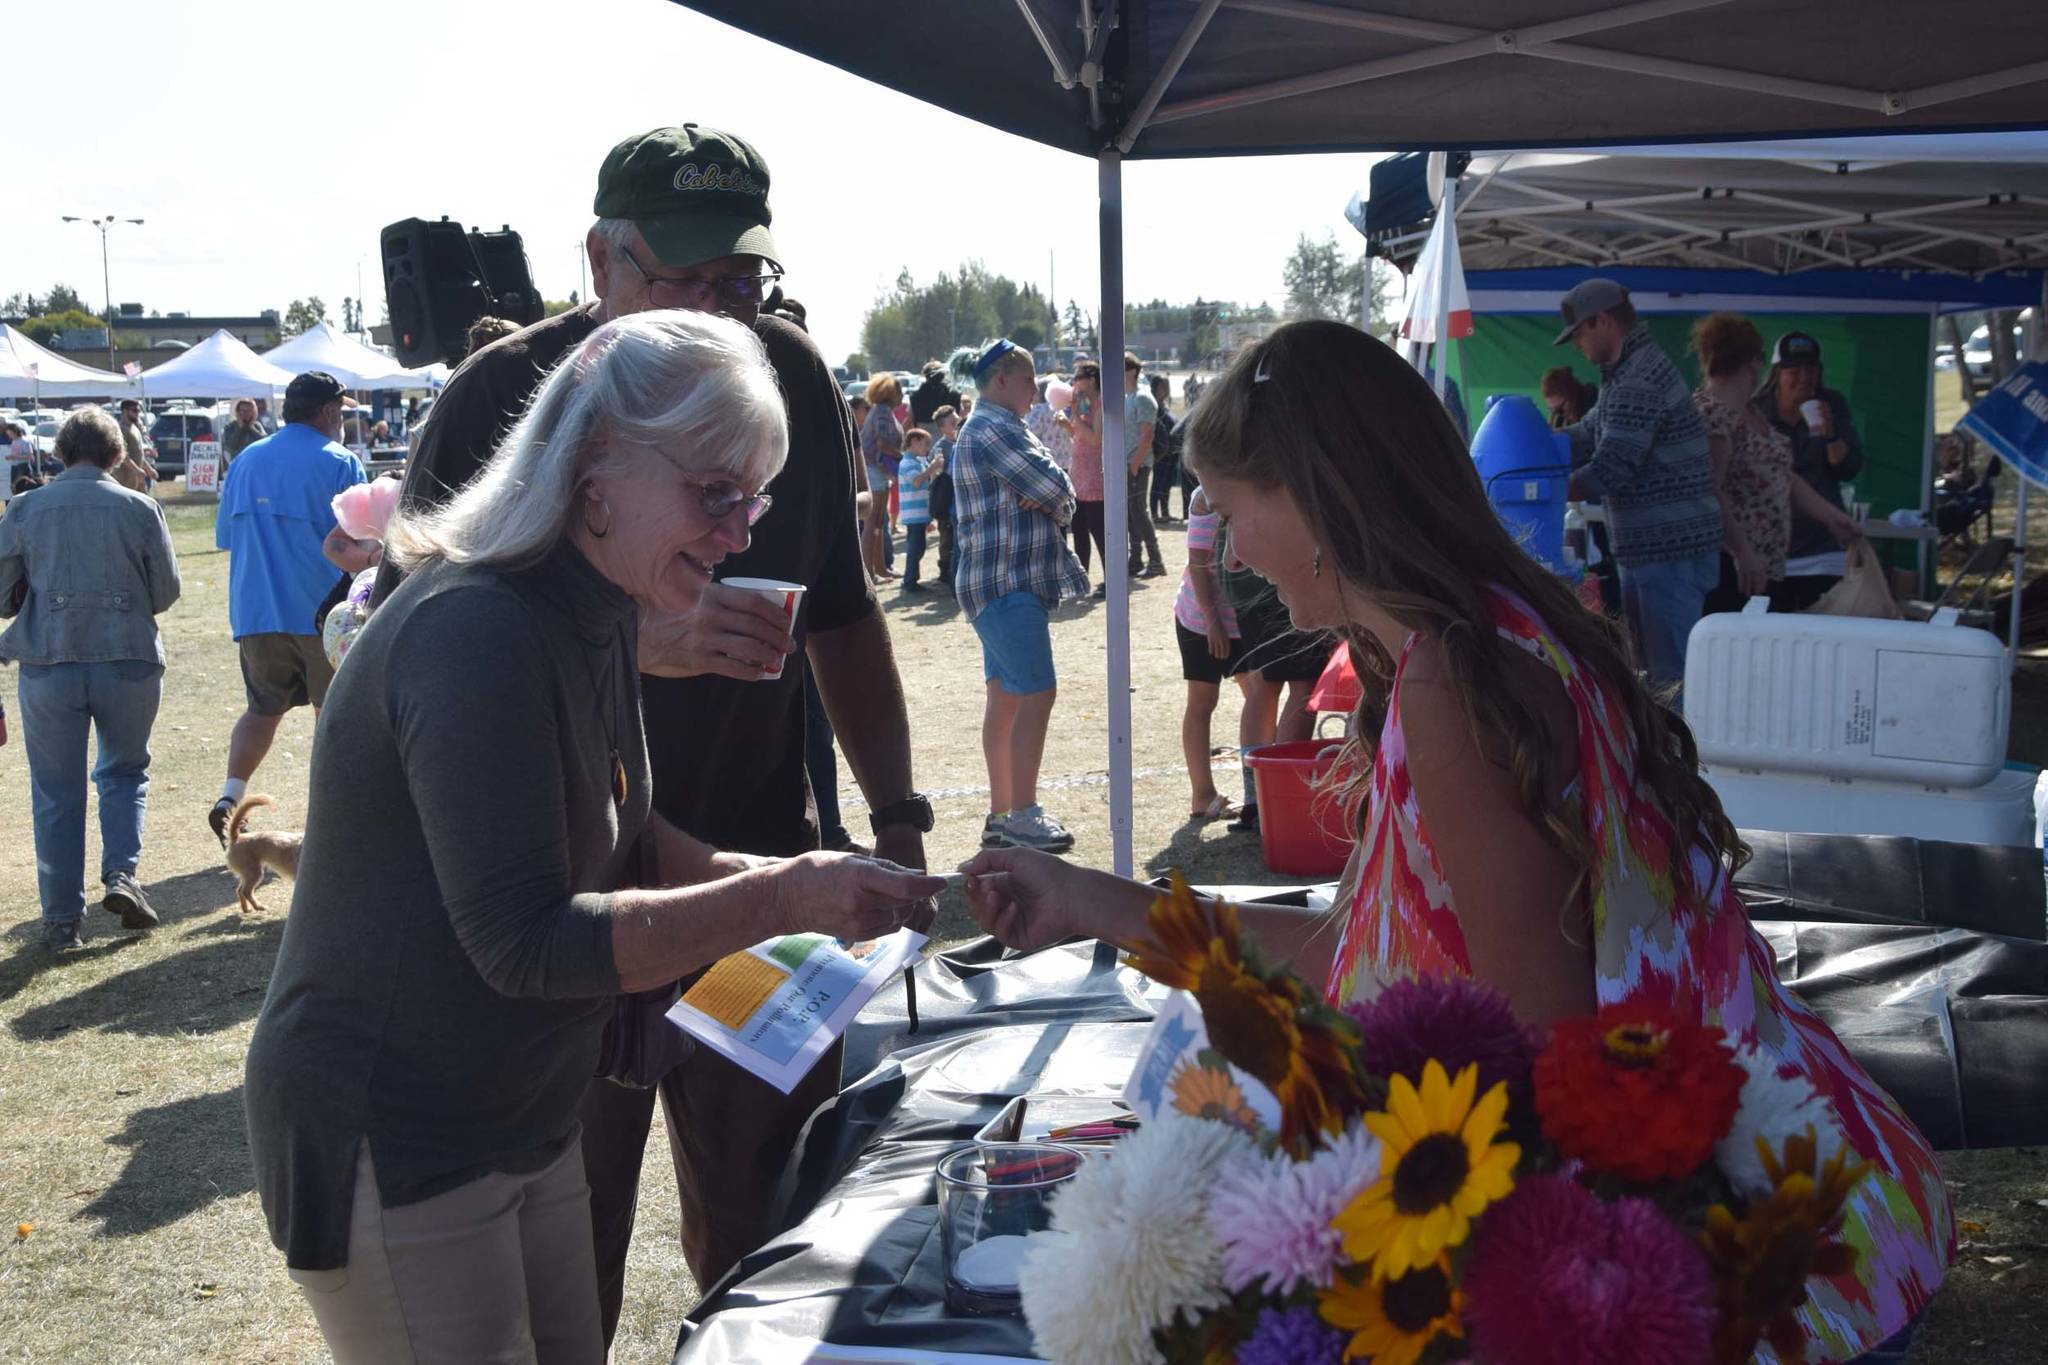 Anna Devolld, right, presents her Promote Our Pollinators project to attendees of Industry Appreciation Day at the Kenai Park Strip in Kenai, Alaska on Aug. 24, 2019. (Photo by Brian Mazurek/Peninsula Clarion)